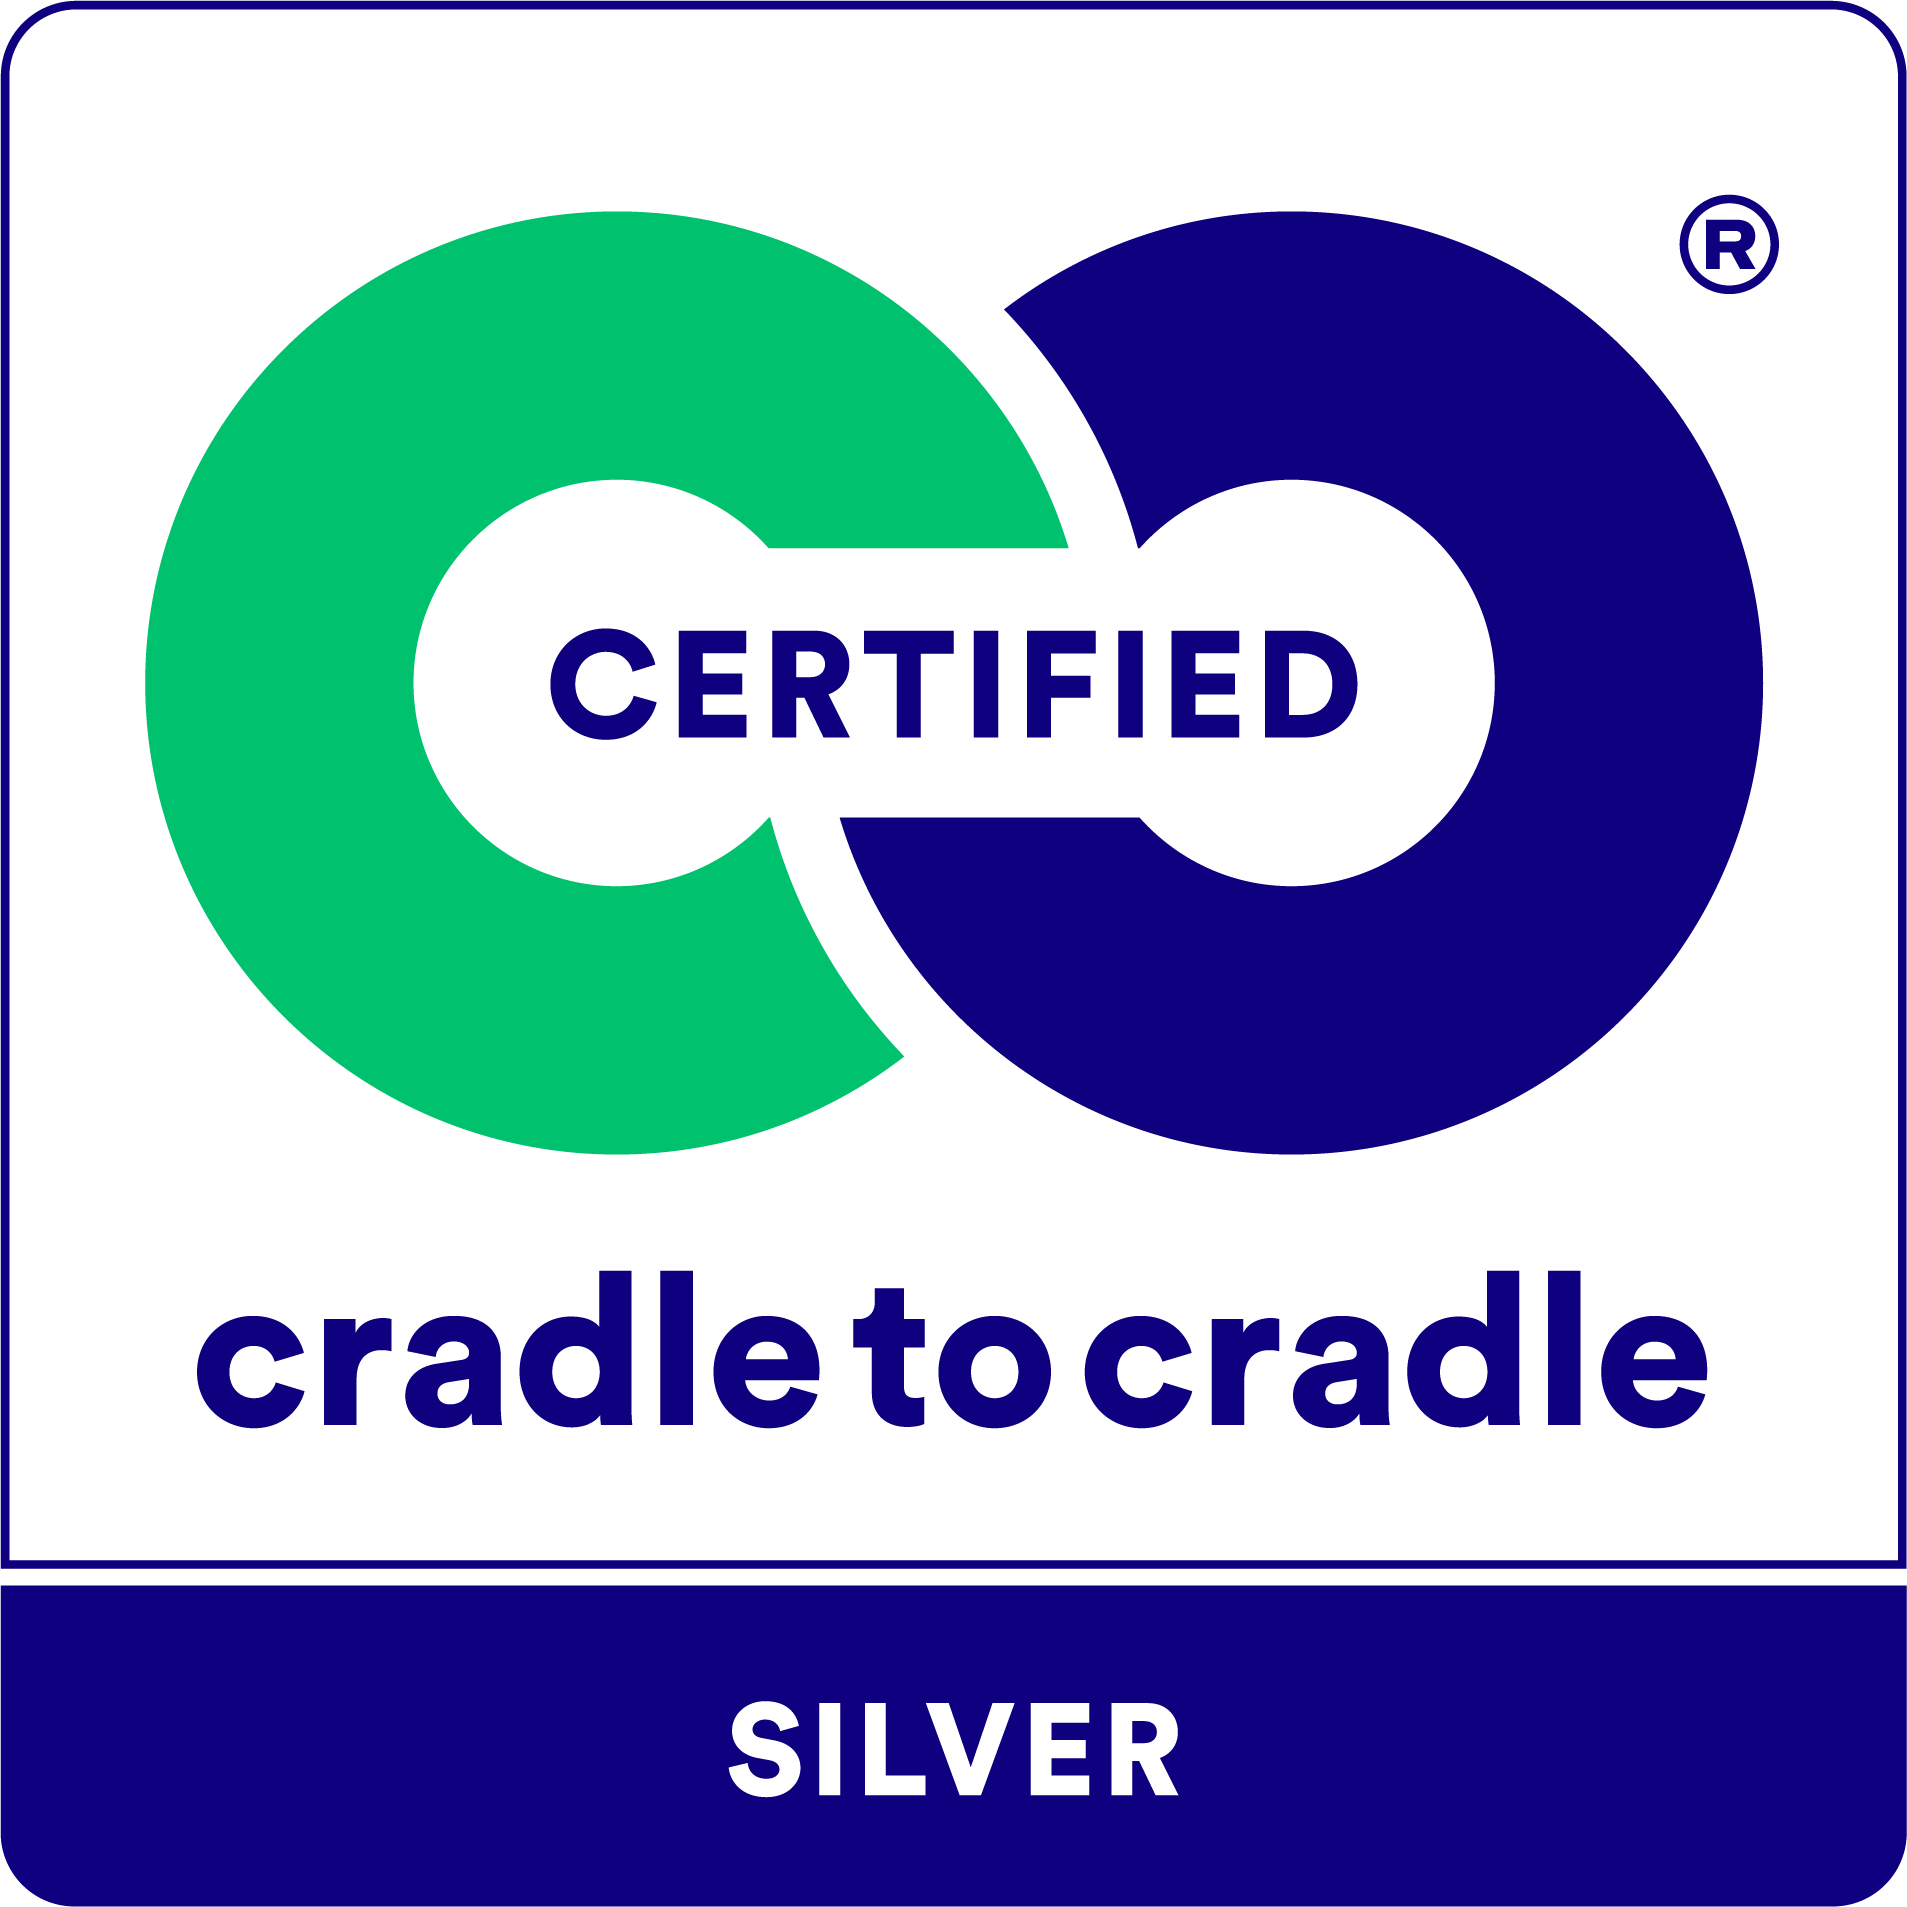 Certified cradle to cradle silver for recycling